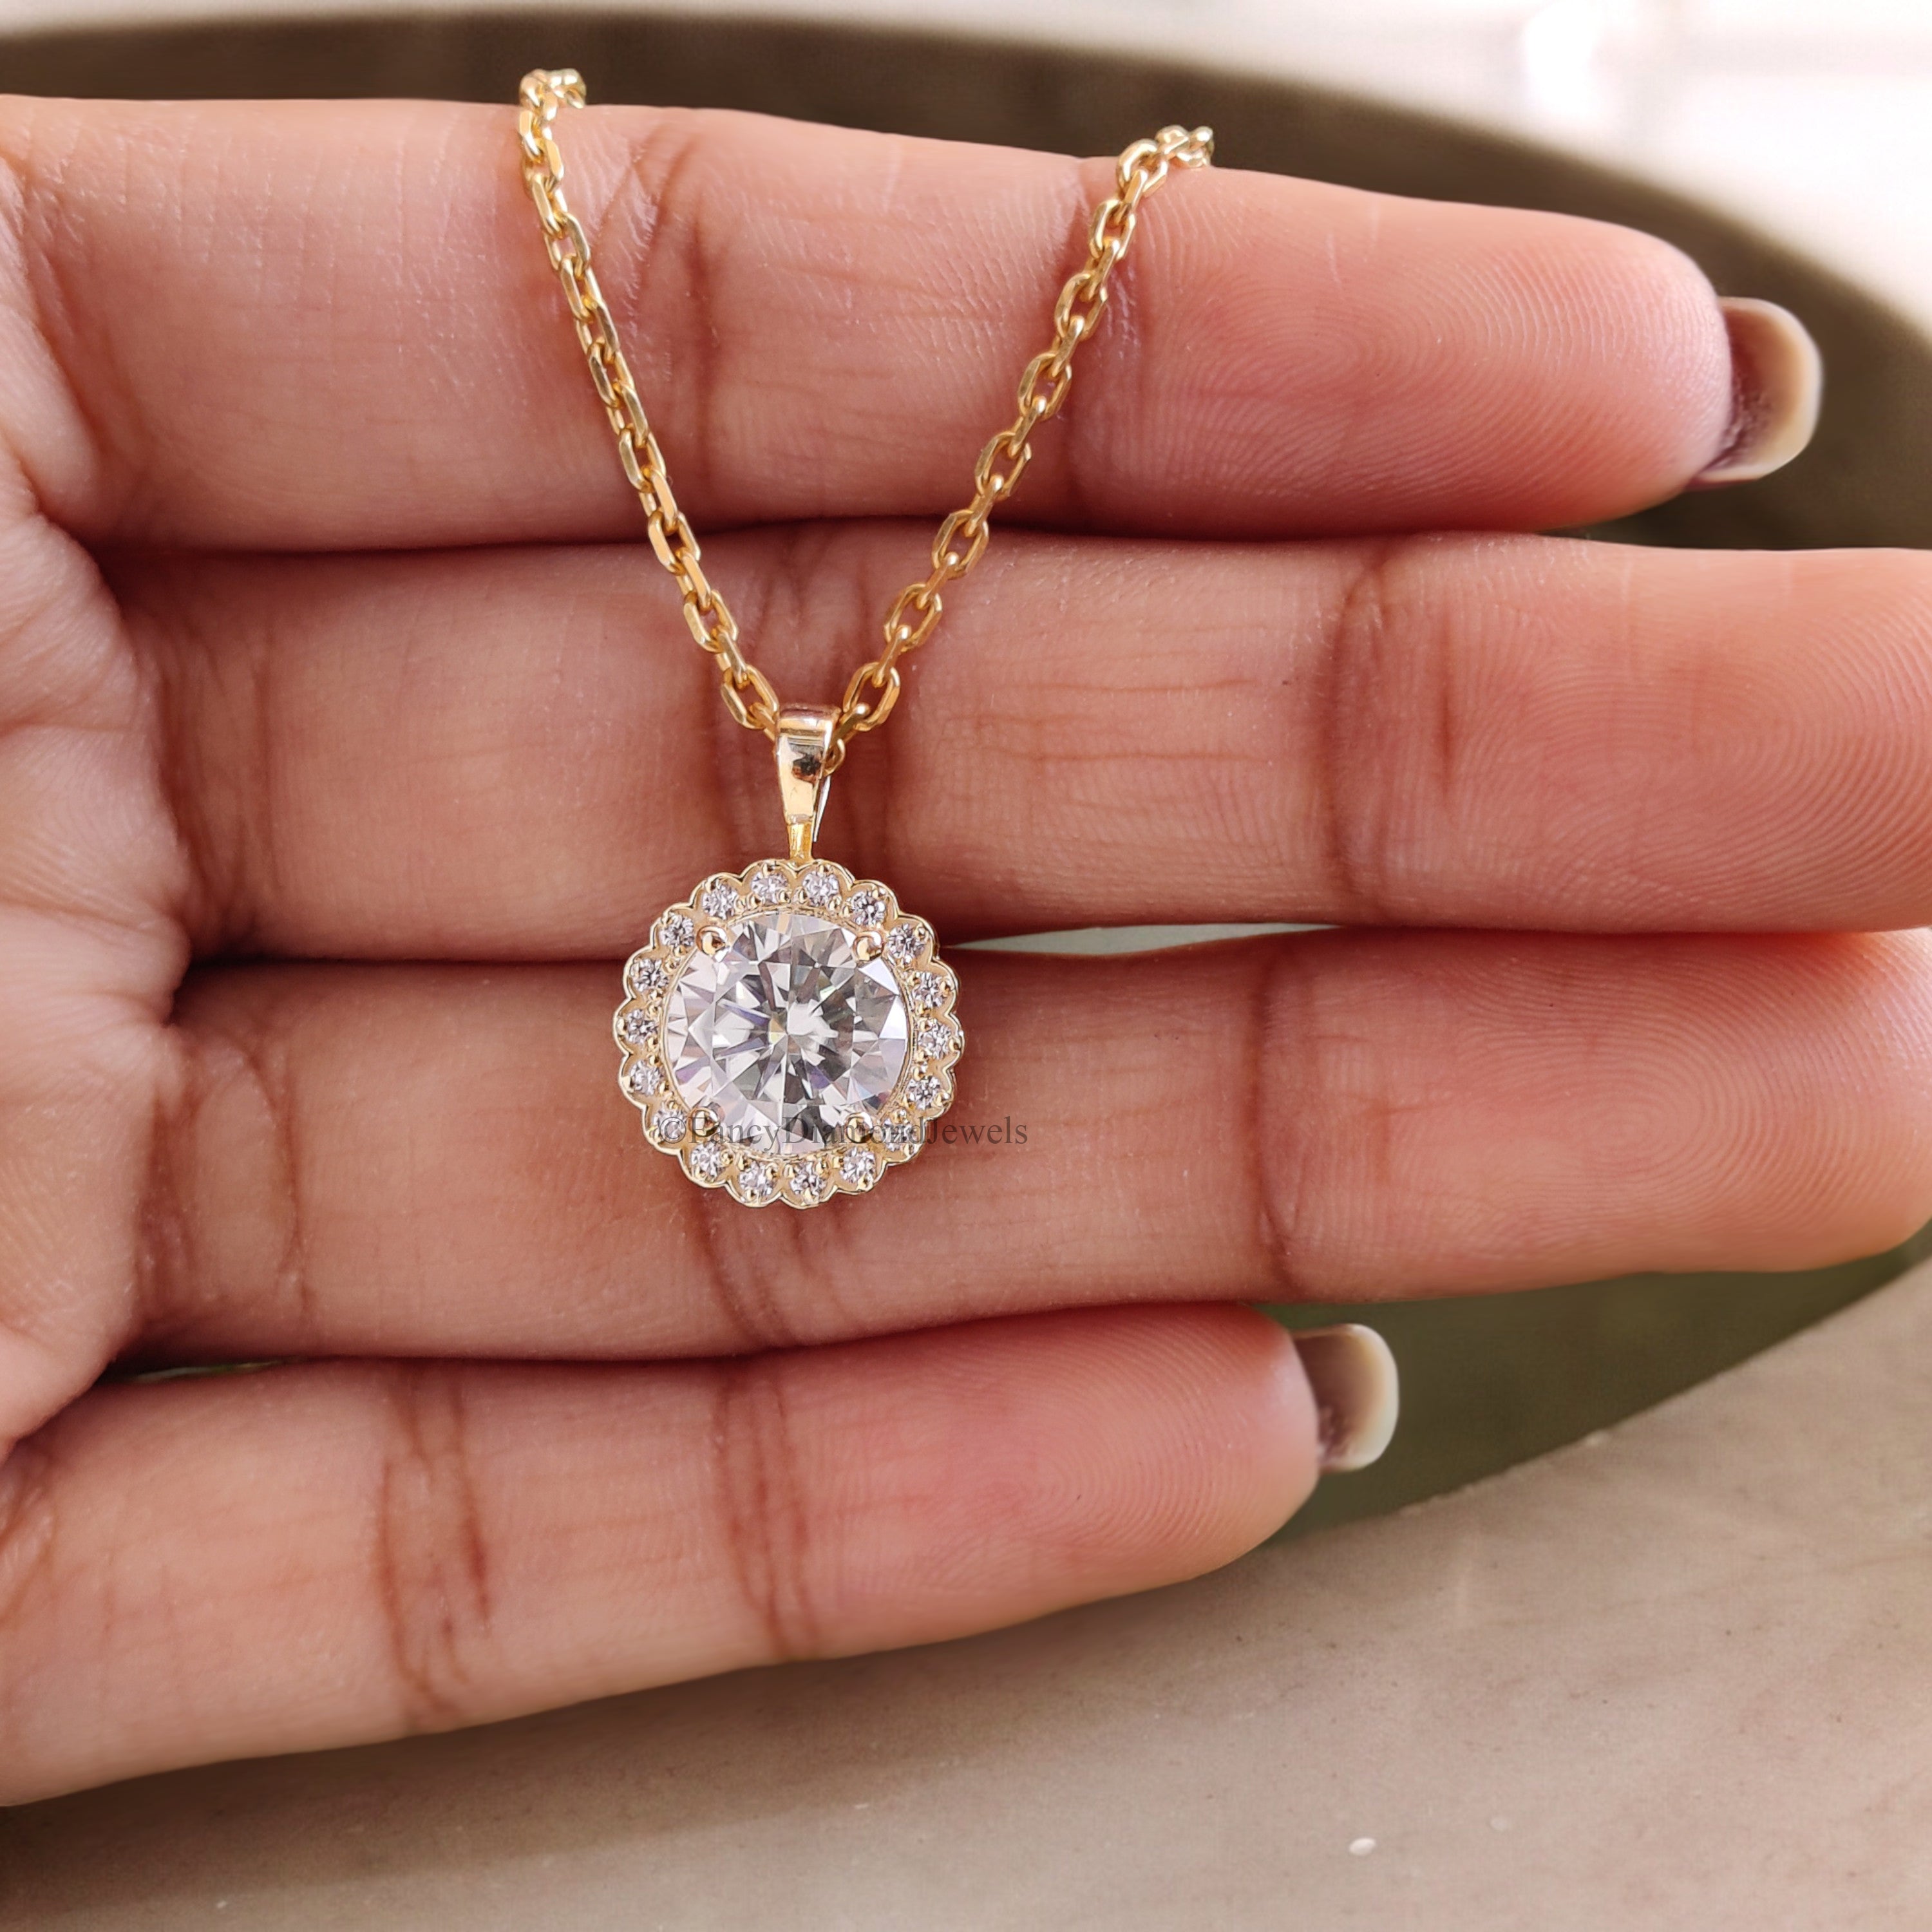 Yellow Gold Halo Pendant Necklace for Women Round Cut Pendant Necklace with Moissanite Stones Necklace for Teen Girls and Women FD189